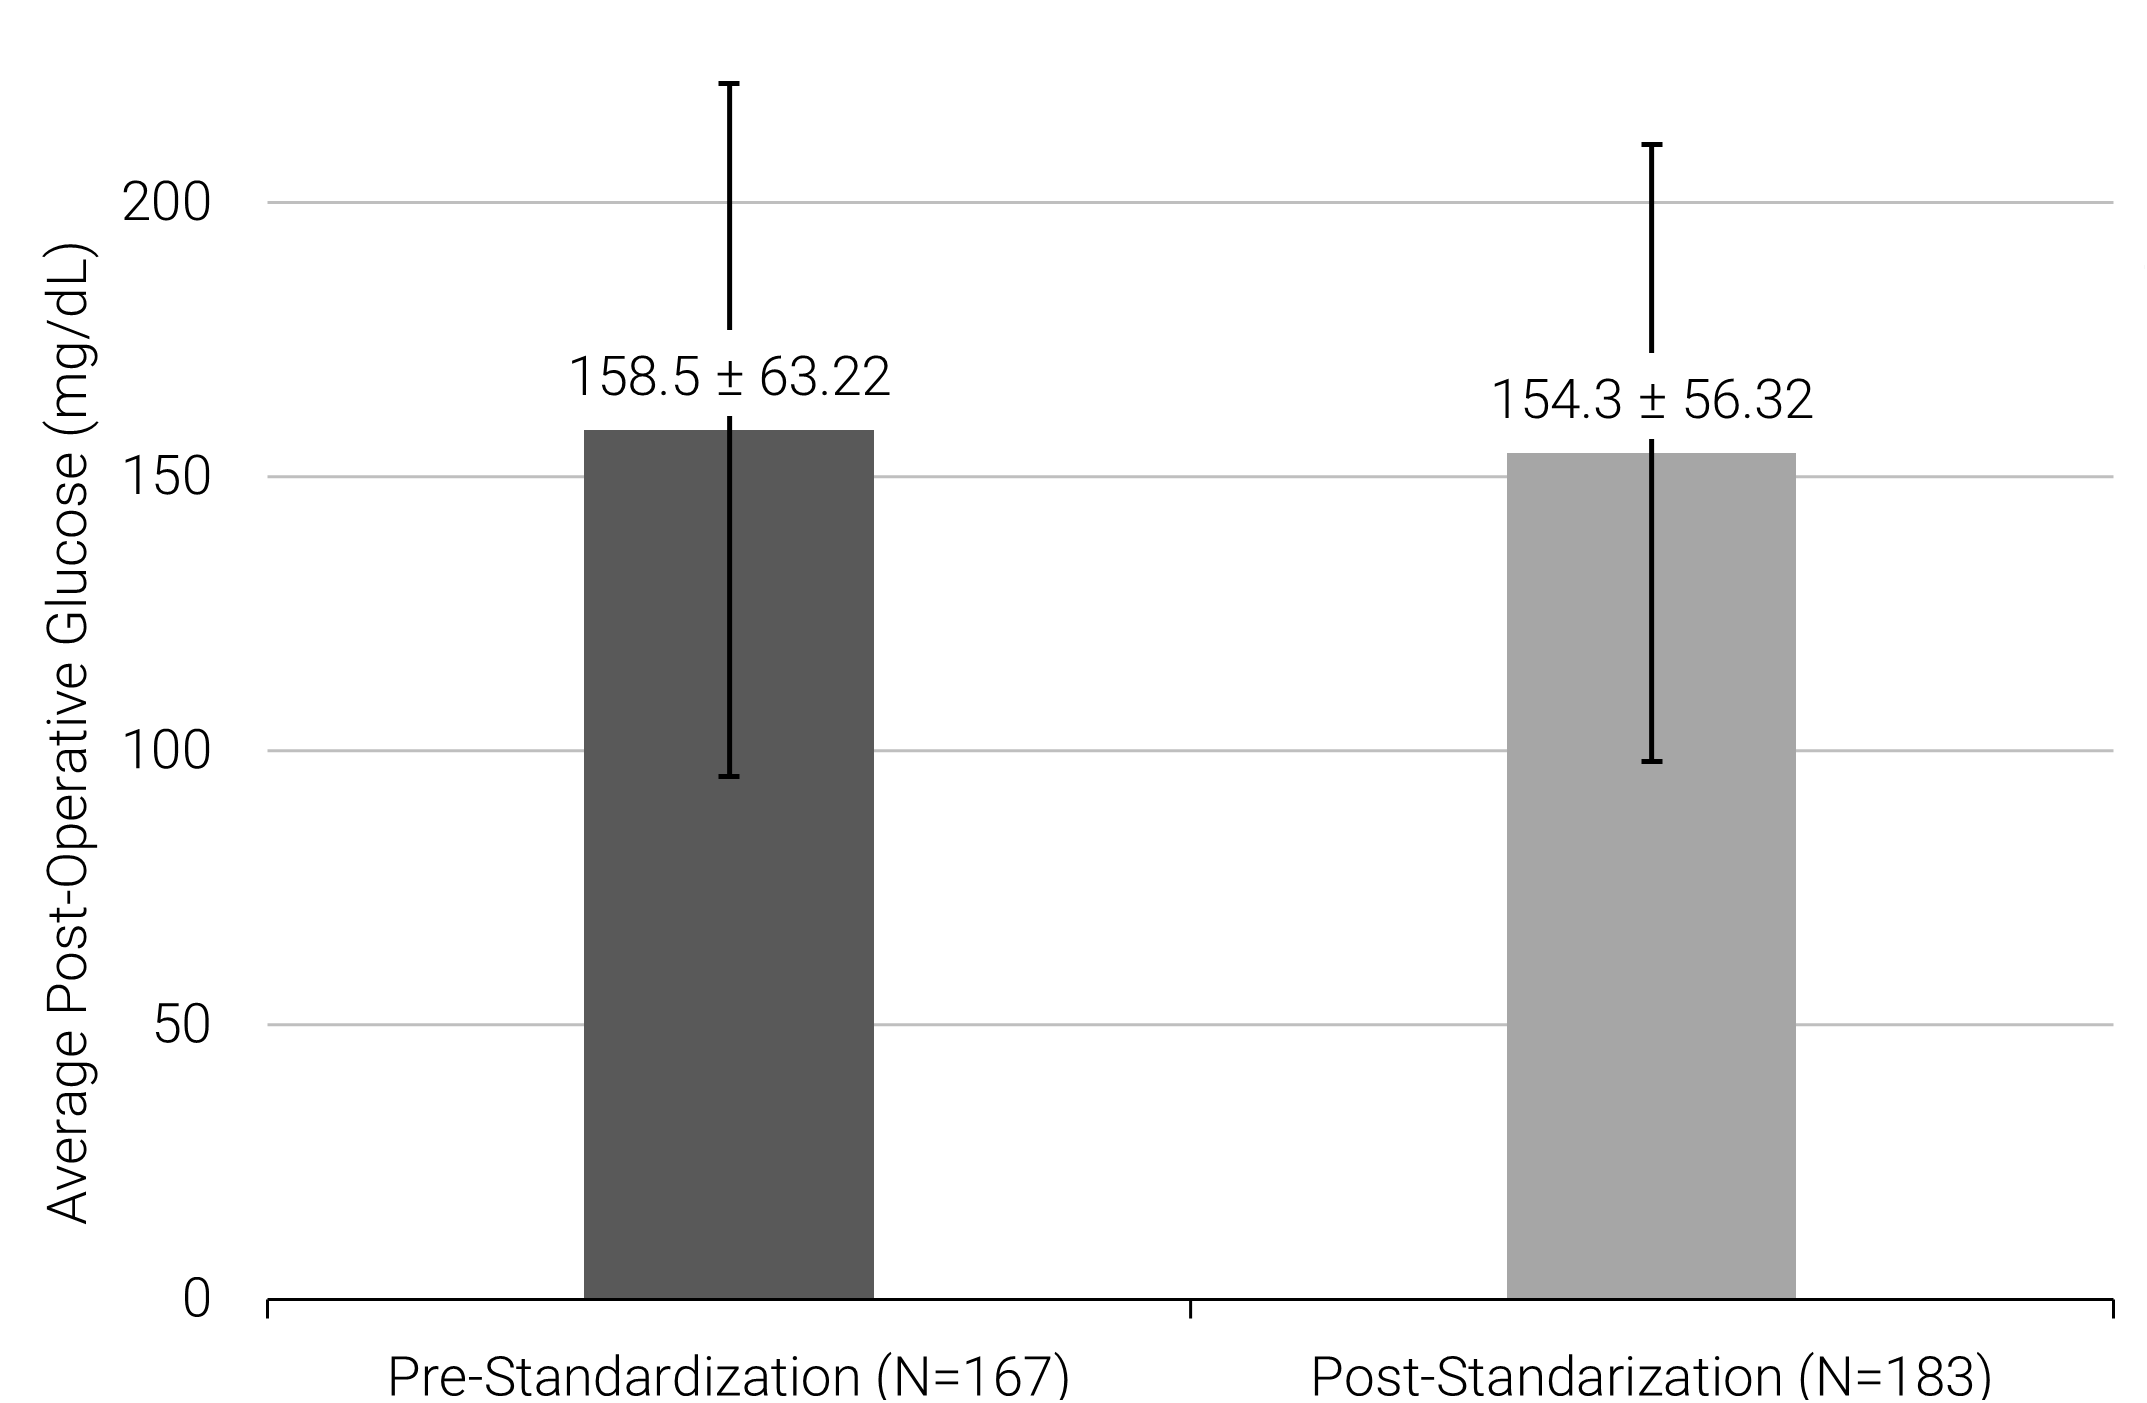 A bar chart displaying that the average postoperative blood glucose concentration is higher pre- versus post-standardization of the glucose optimization education program (158.5 versus 154.3)